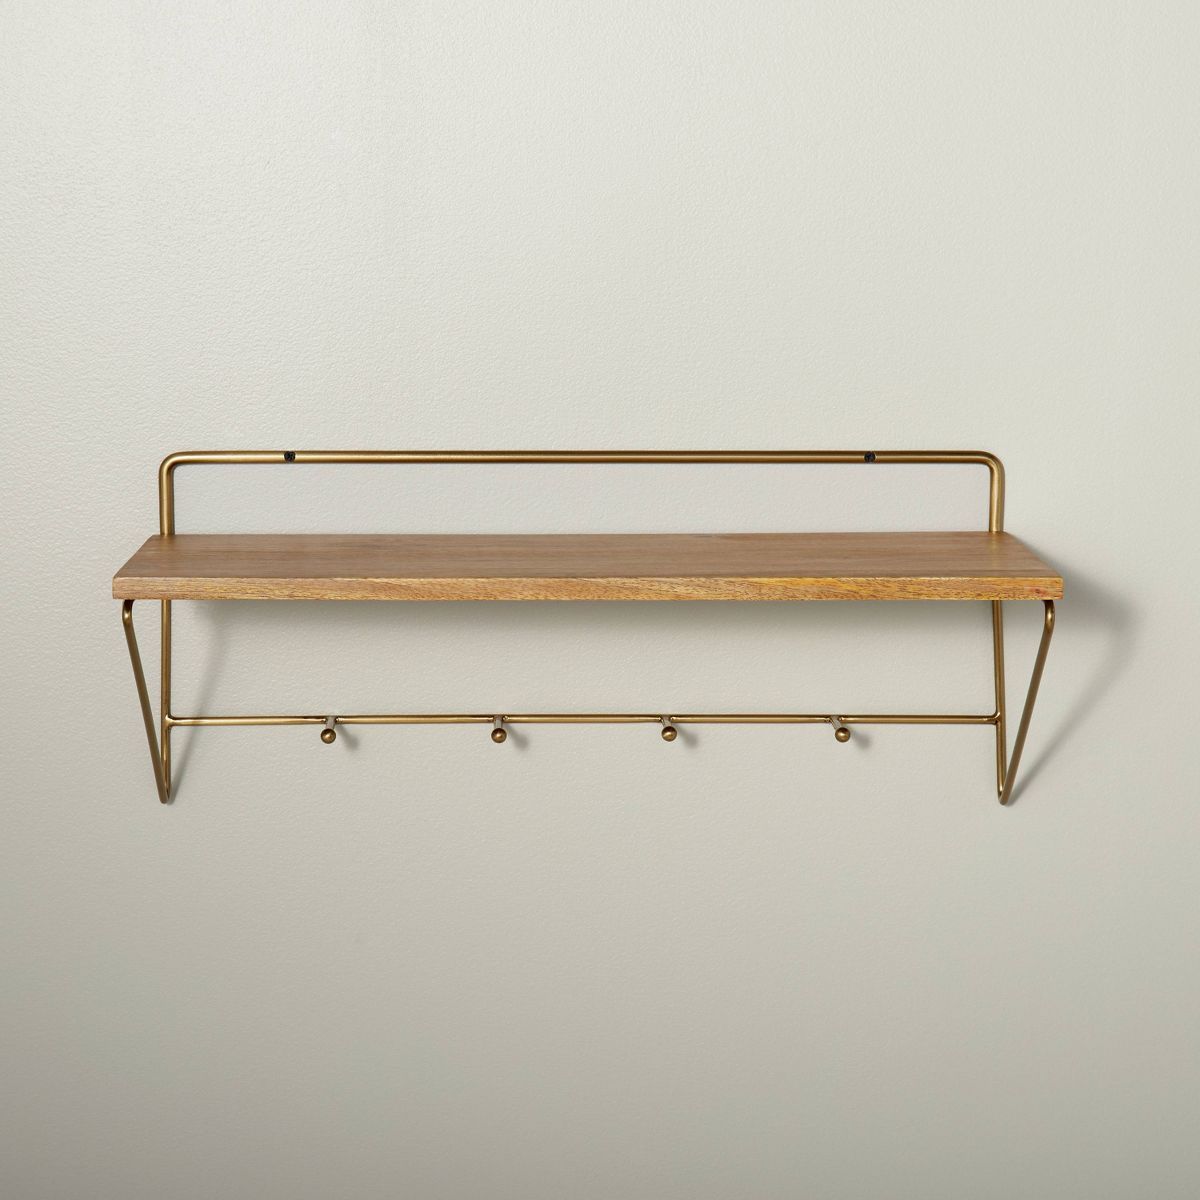 24" Wood & Brass Wall Shelf with Hooks - Hearth & Hand™ with Magnolia | Target